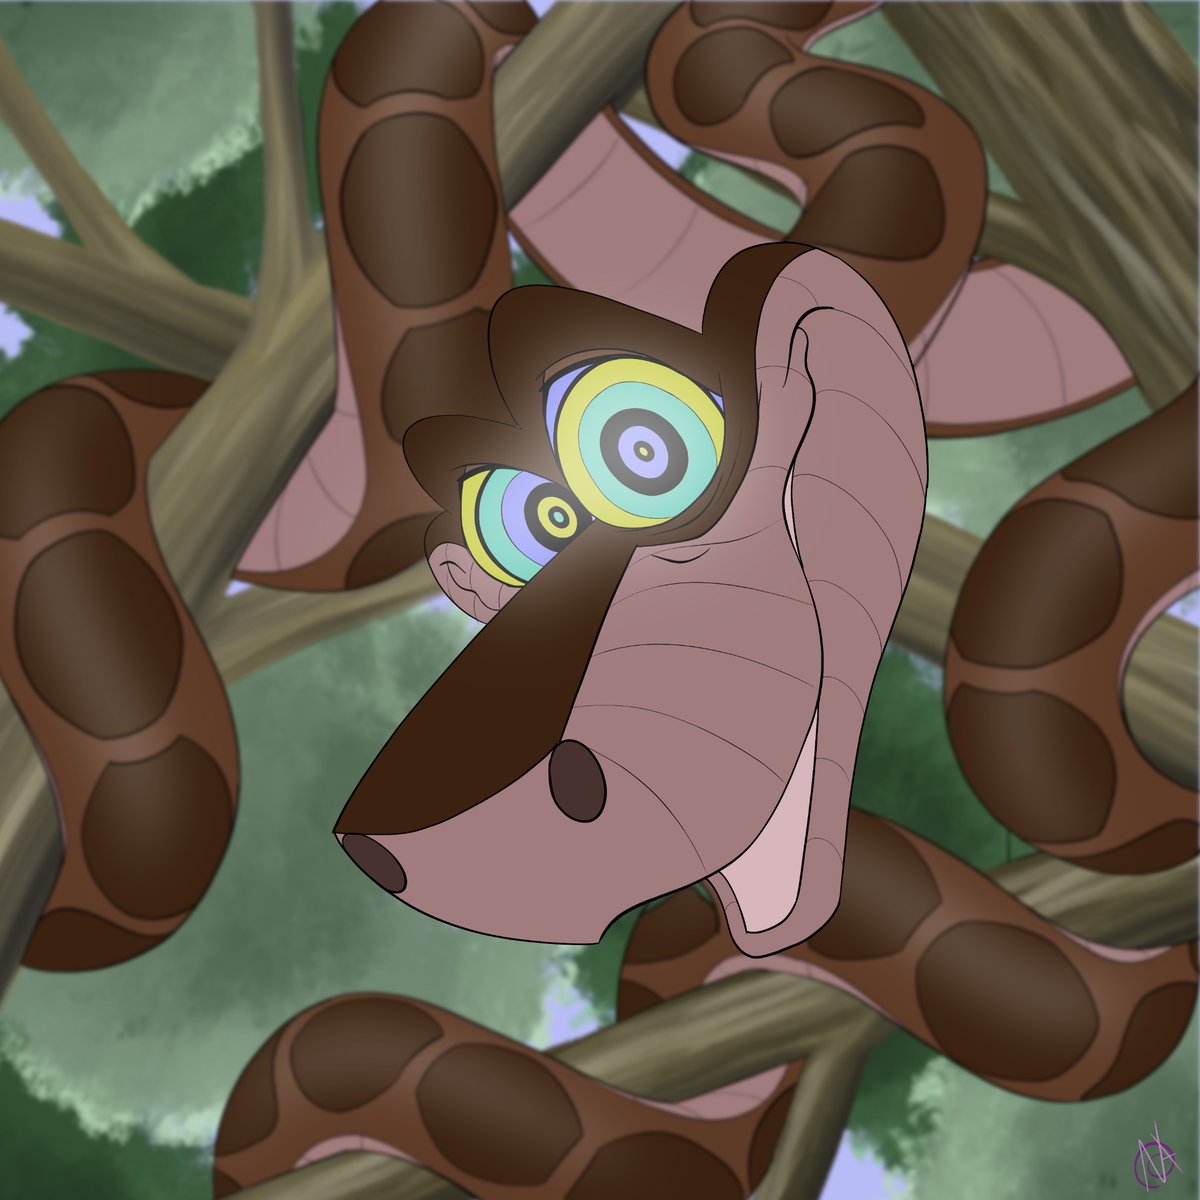 Happy Monday yall and a lil more Kaa to start the week Here’s just a lil alternate version of the previous post, or maybe it’s even a couple seconds before or after it hehe Moving around as he doesss to keep you transssfixed :3